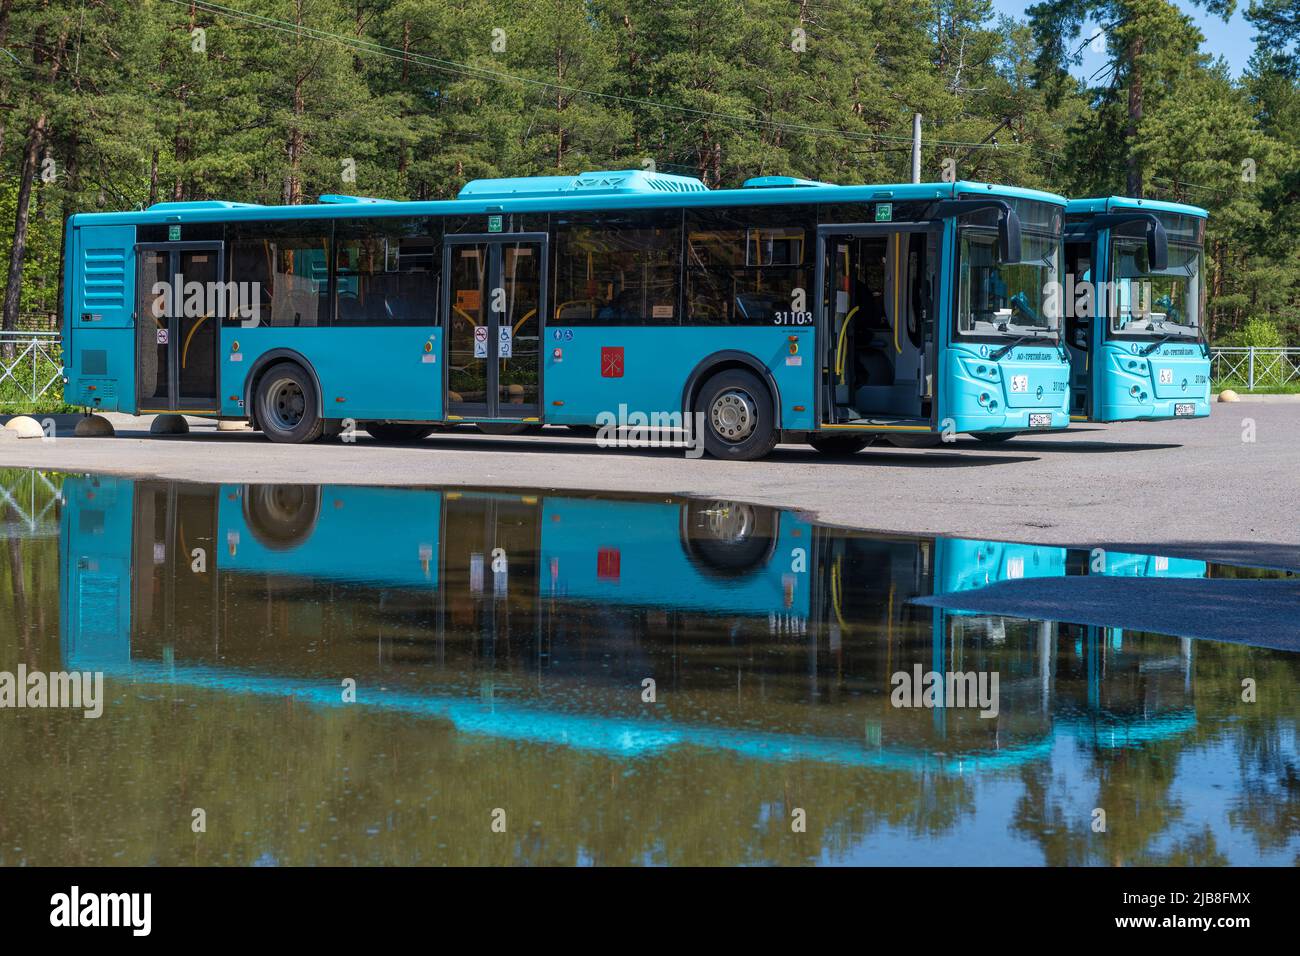 SESTRORETSK, RUSSIA - MAY 29, 2022: Two city buses LiAZ-5292.67 on the final stop of the route on a sunny May day Stock Photo